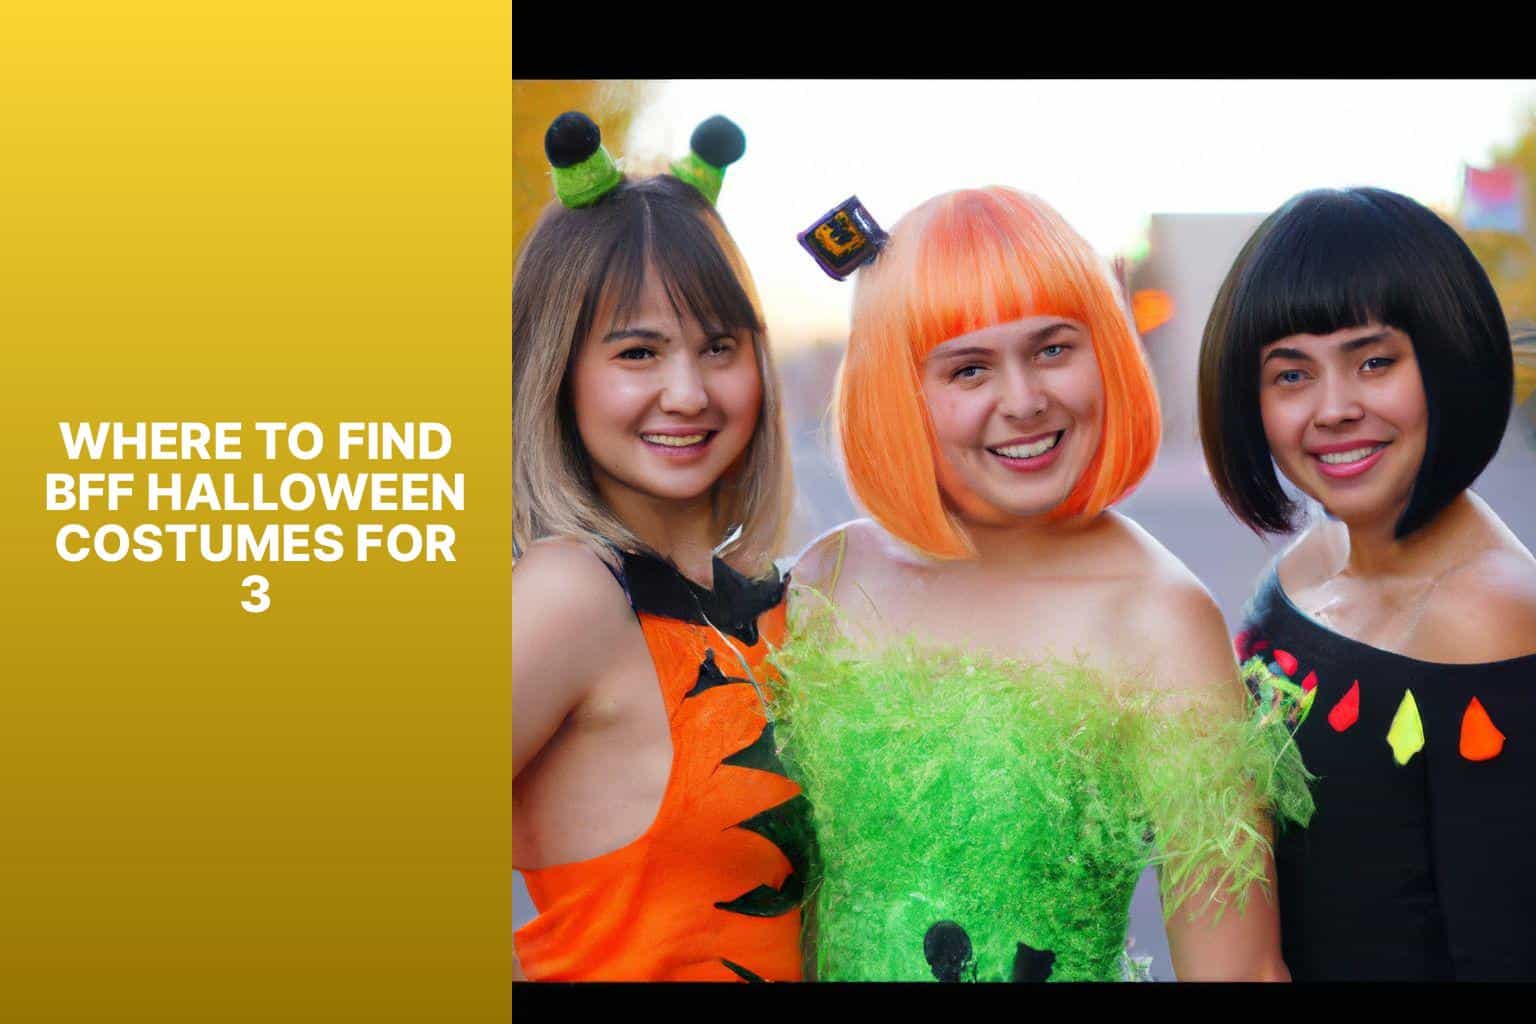 Where to Find BFF Halloween Costumes for 3 - bff halloween costumes for 3 